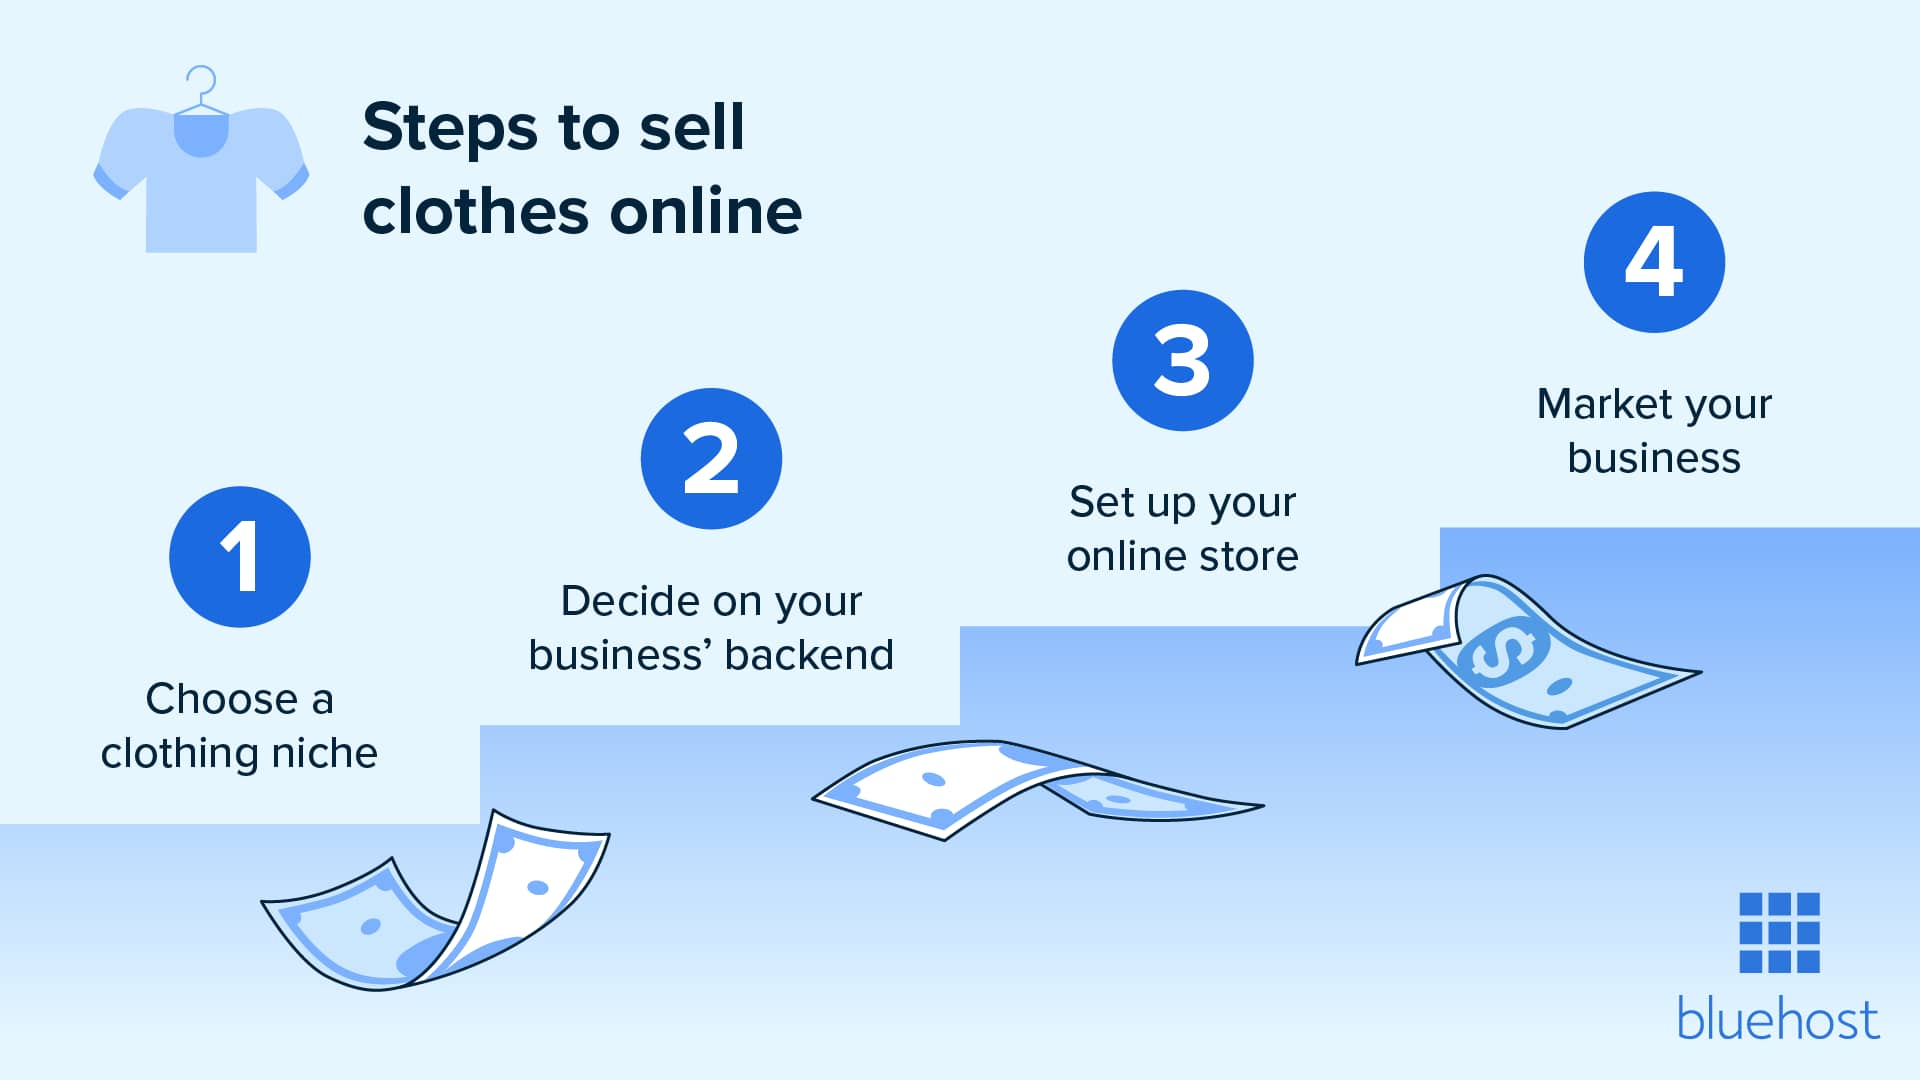 A step-by-step guide on how to start selling clothes online.